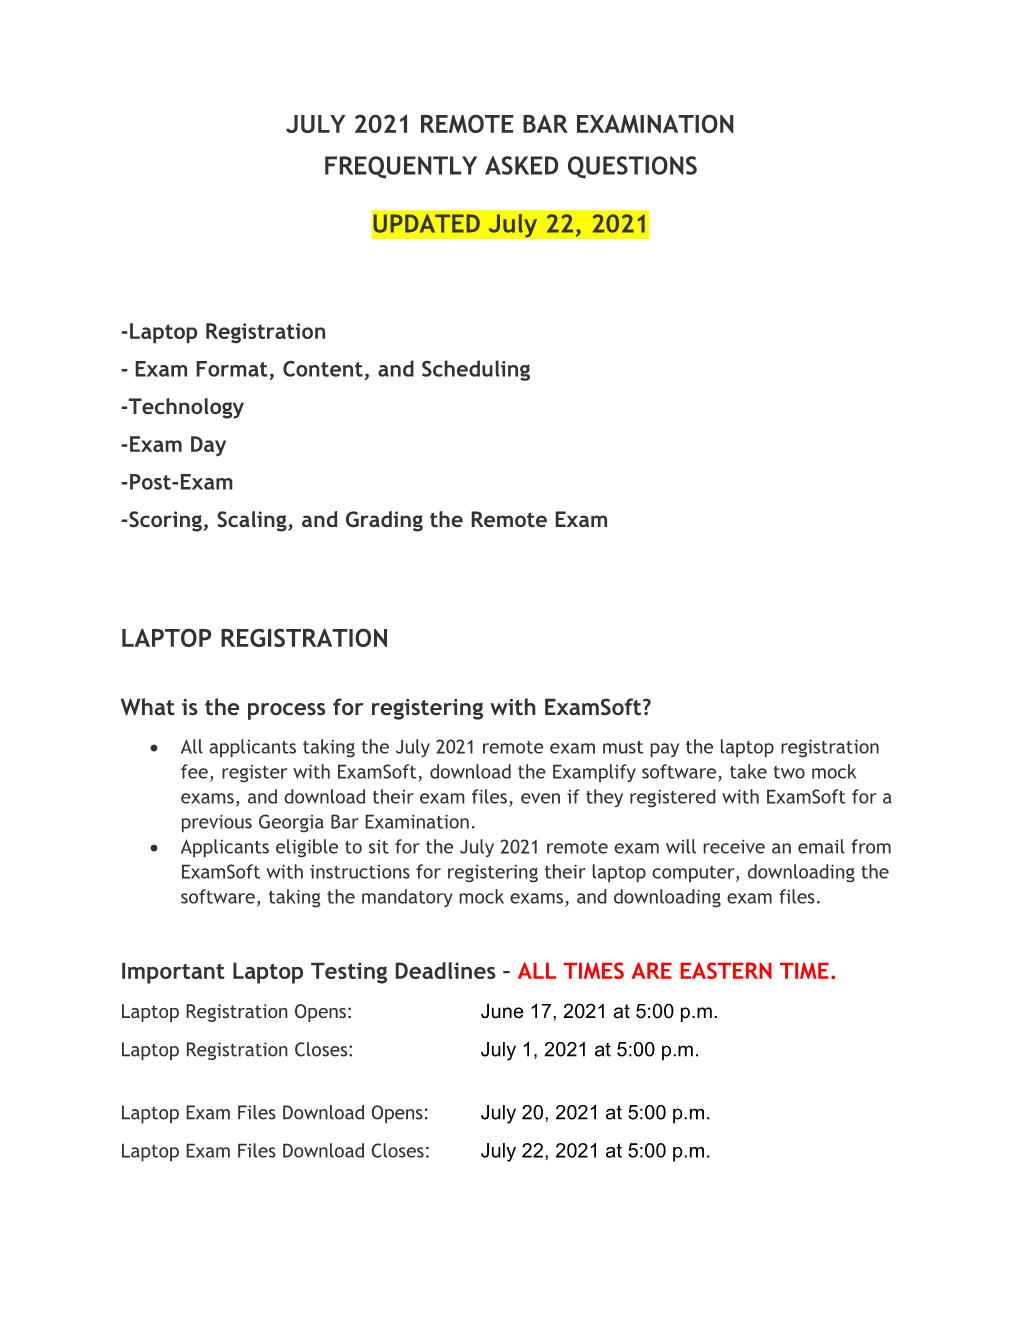 JULY 2021 REMOTE BAR EXAMINATION FREQUENTLY ASKED QUESTIONS UPDATED July 22, 2021 LAPTOP REGISTRATION